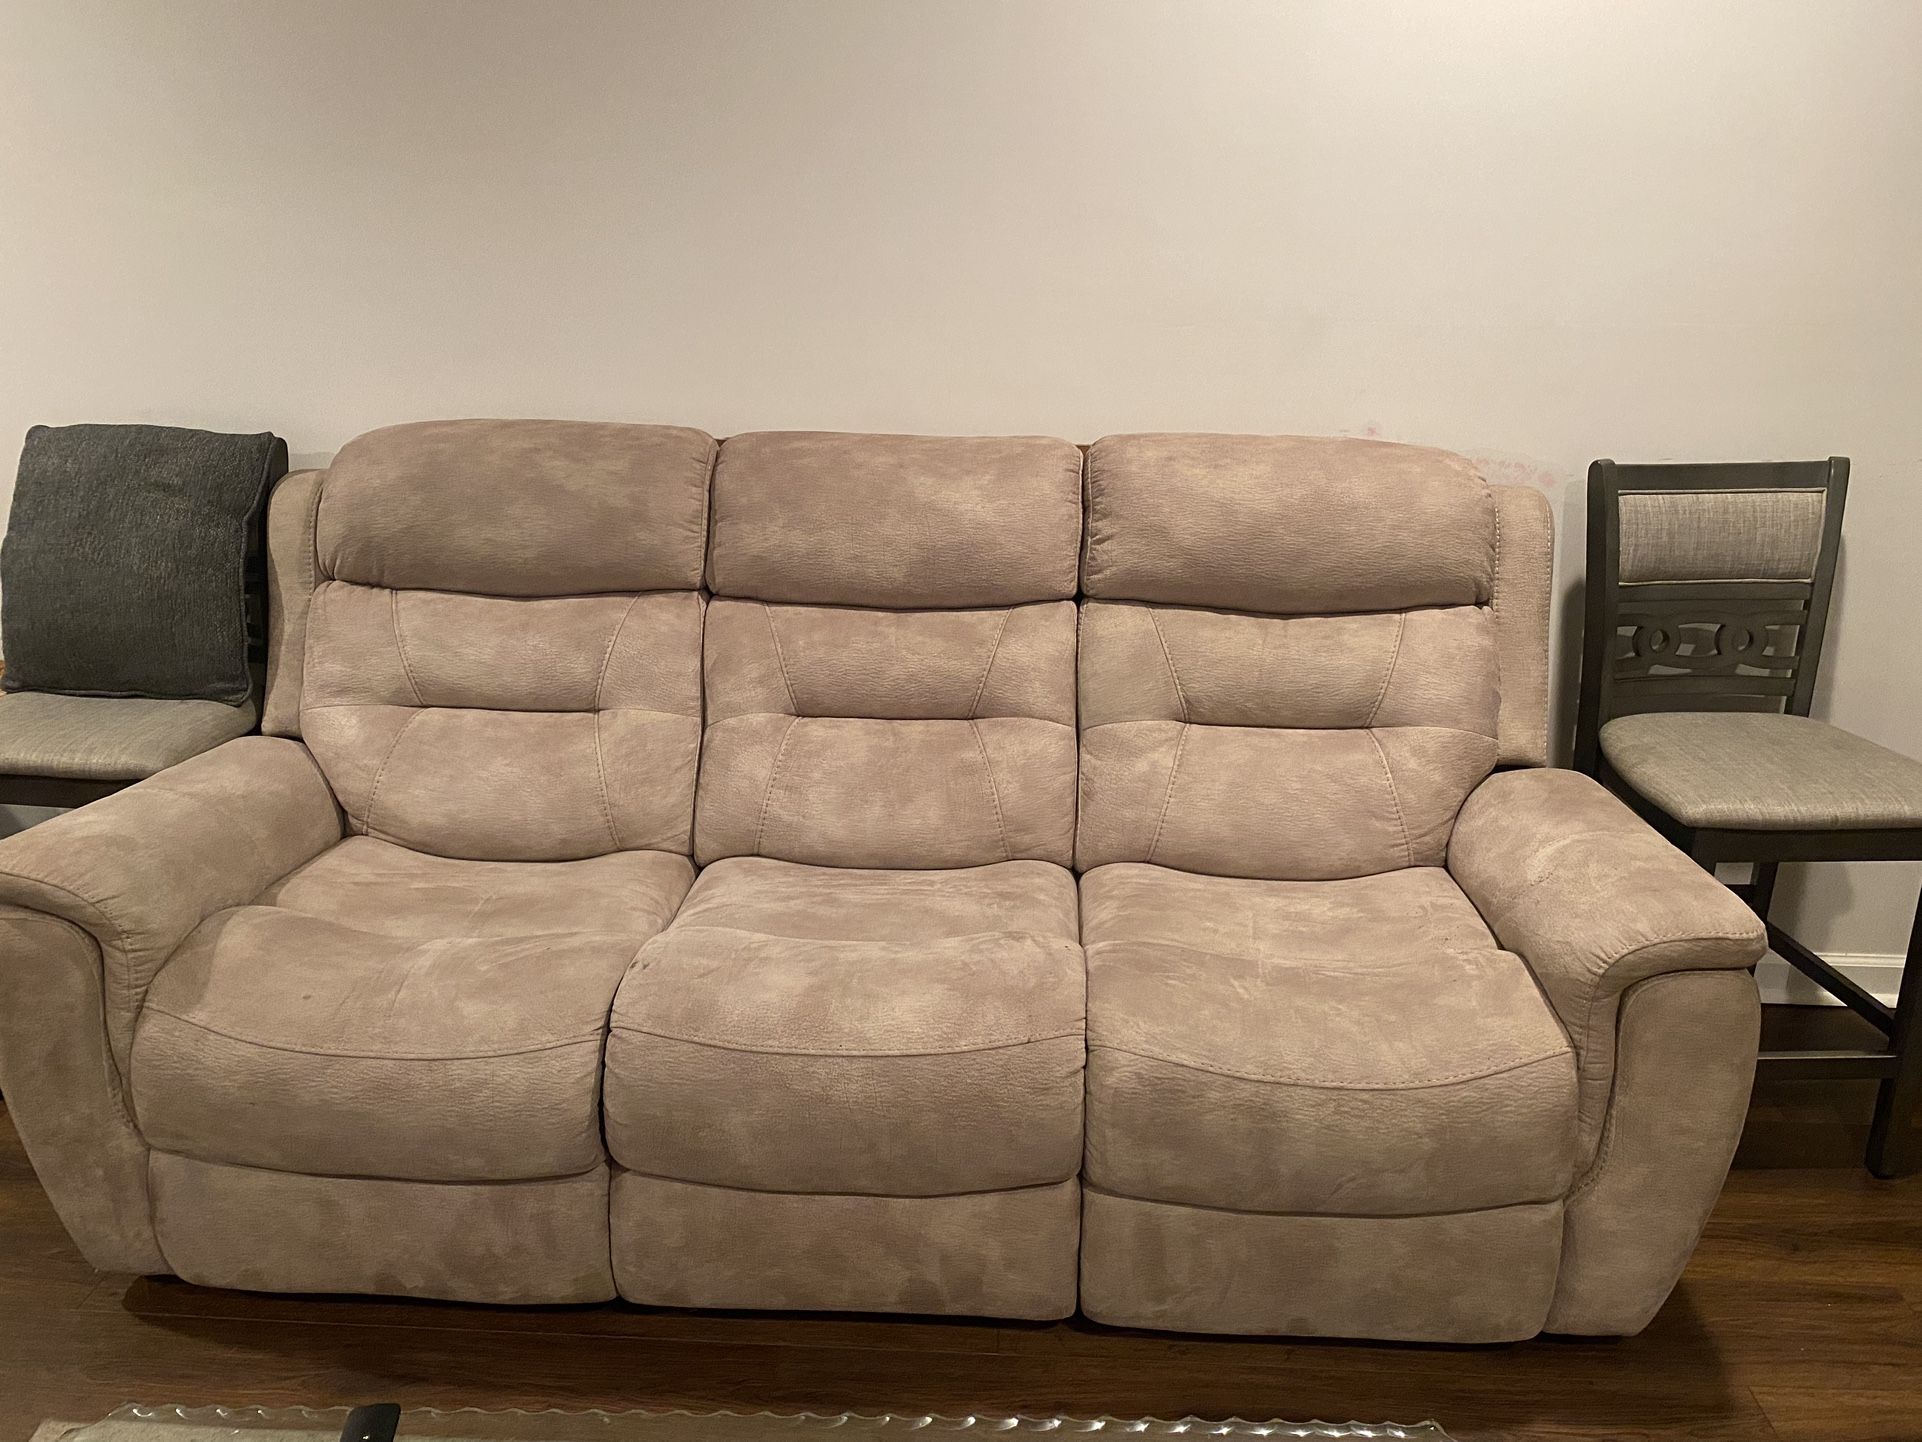 Need Gone ASAP Couch For Sale 